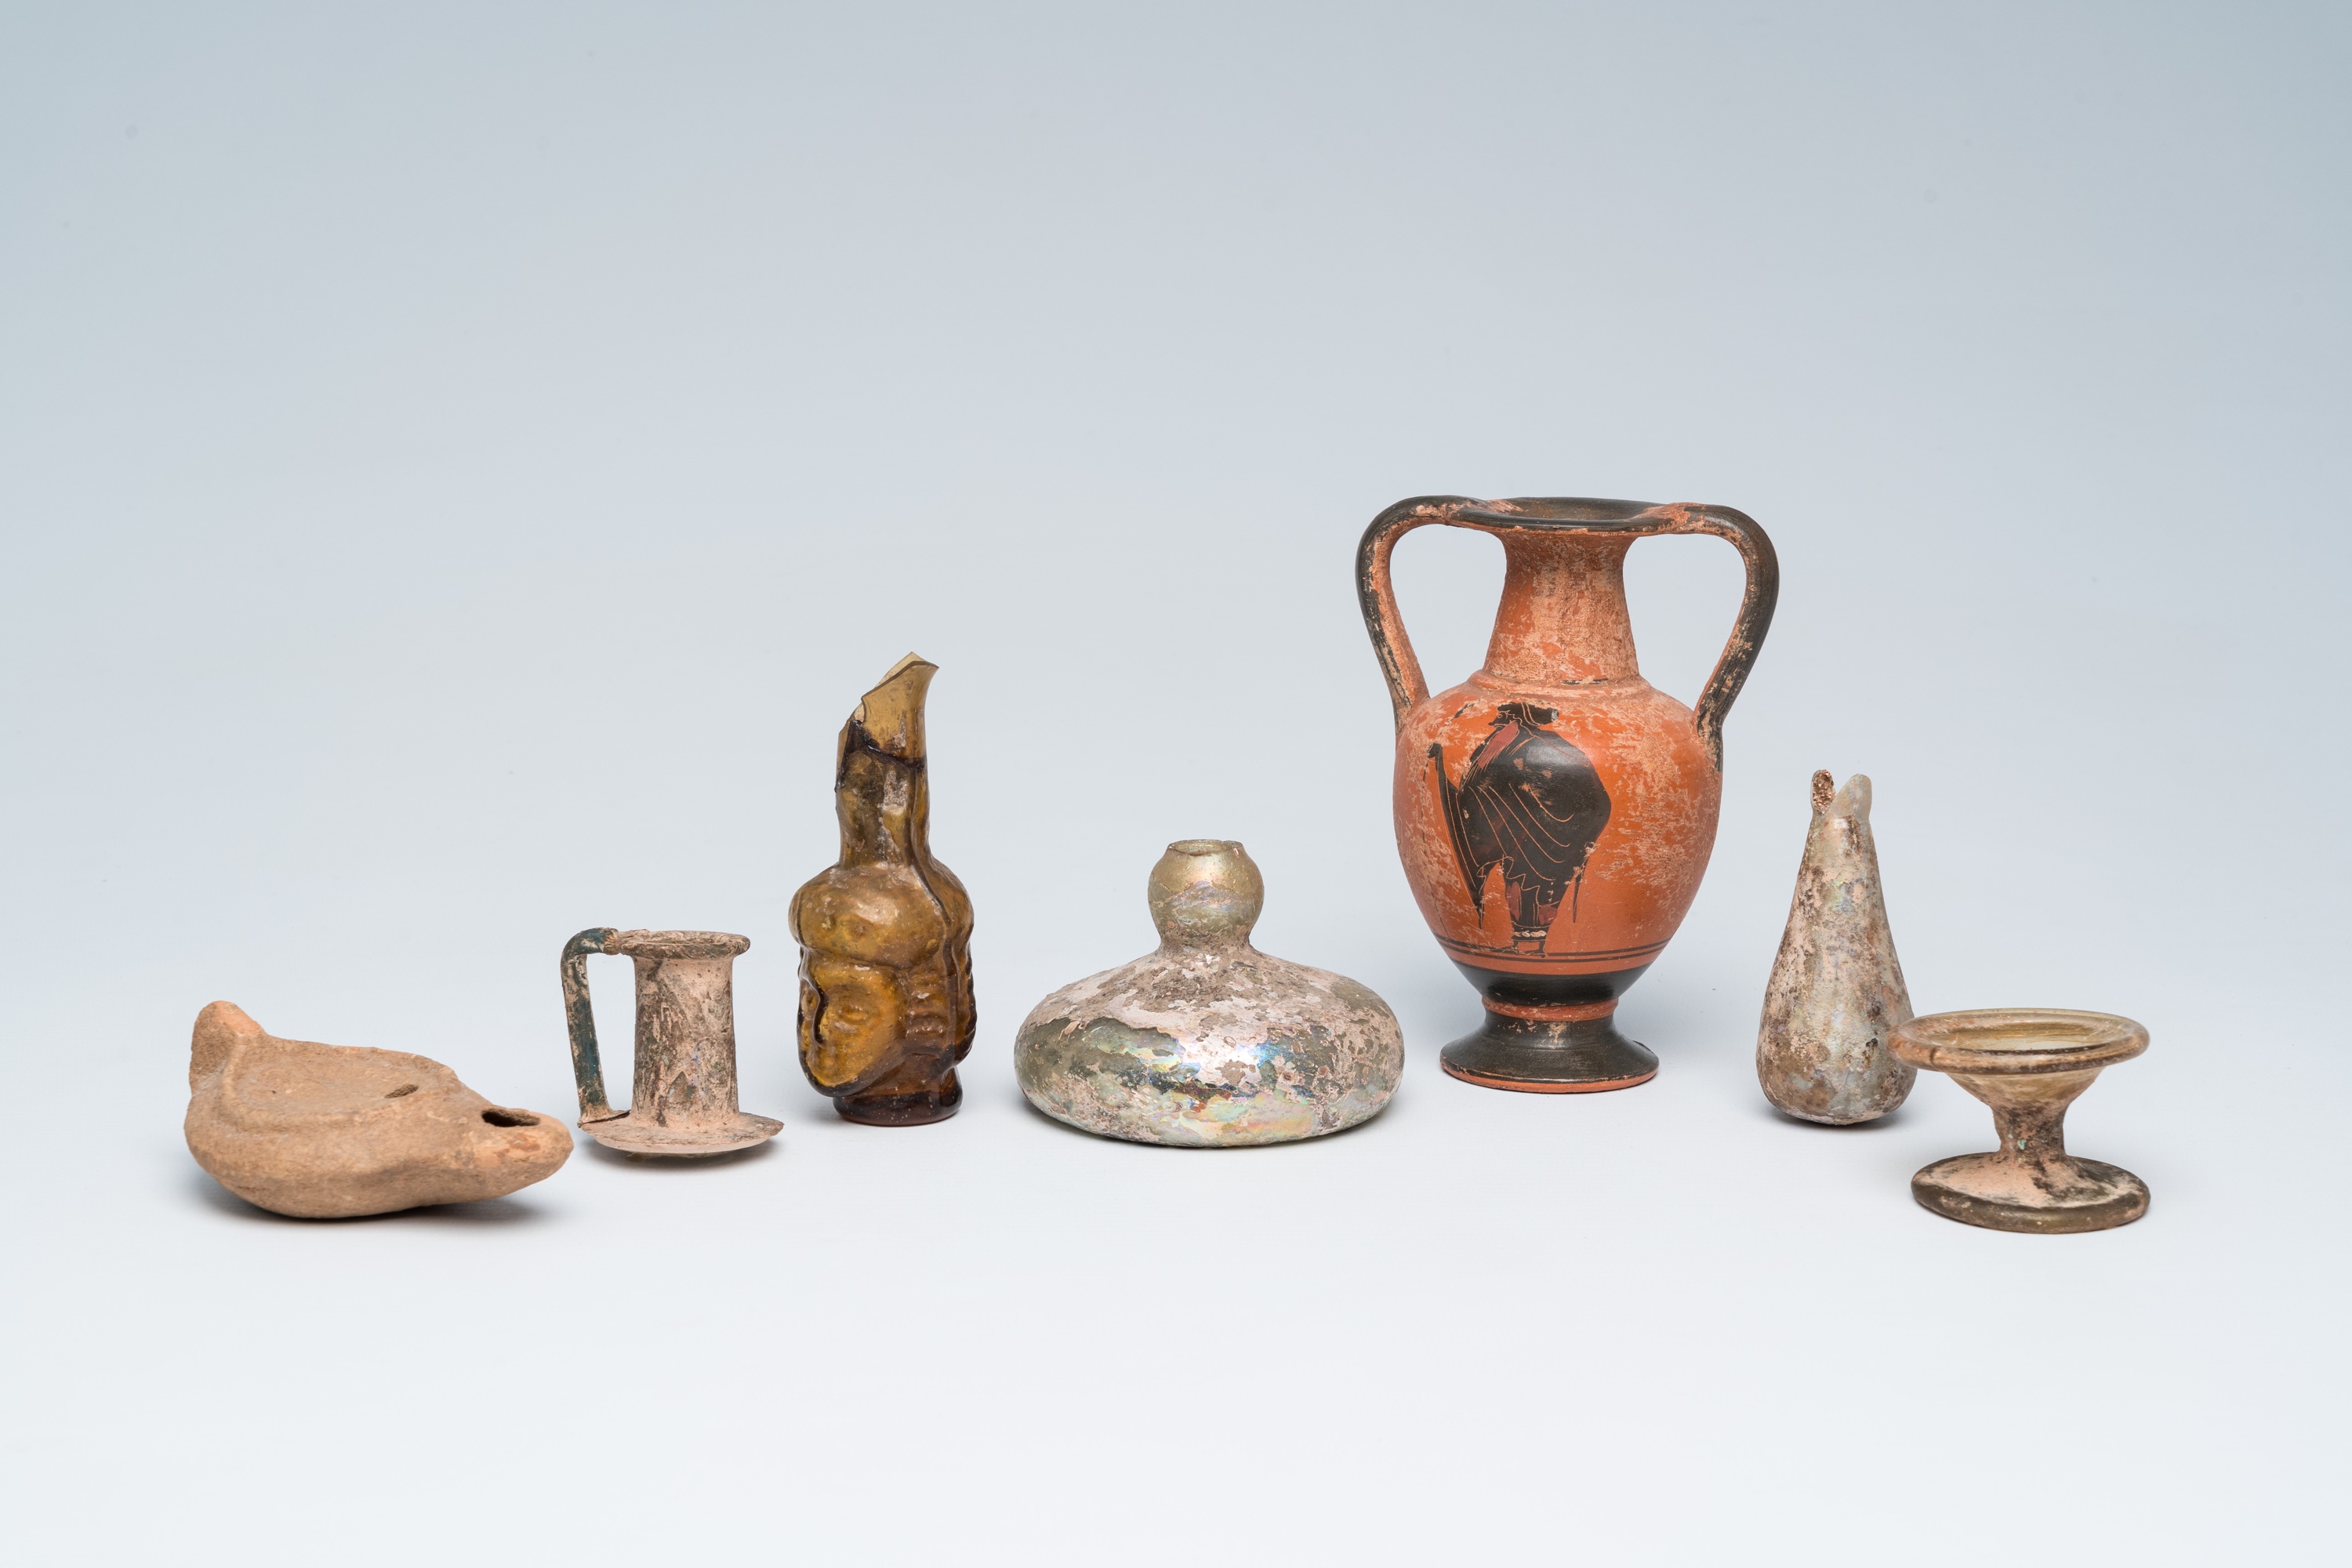 A varied collection of archaeological glass and pottery utensils and fragments, Greco-Roman period a